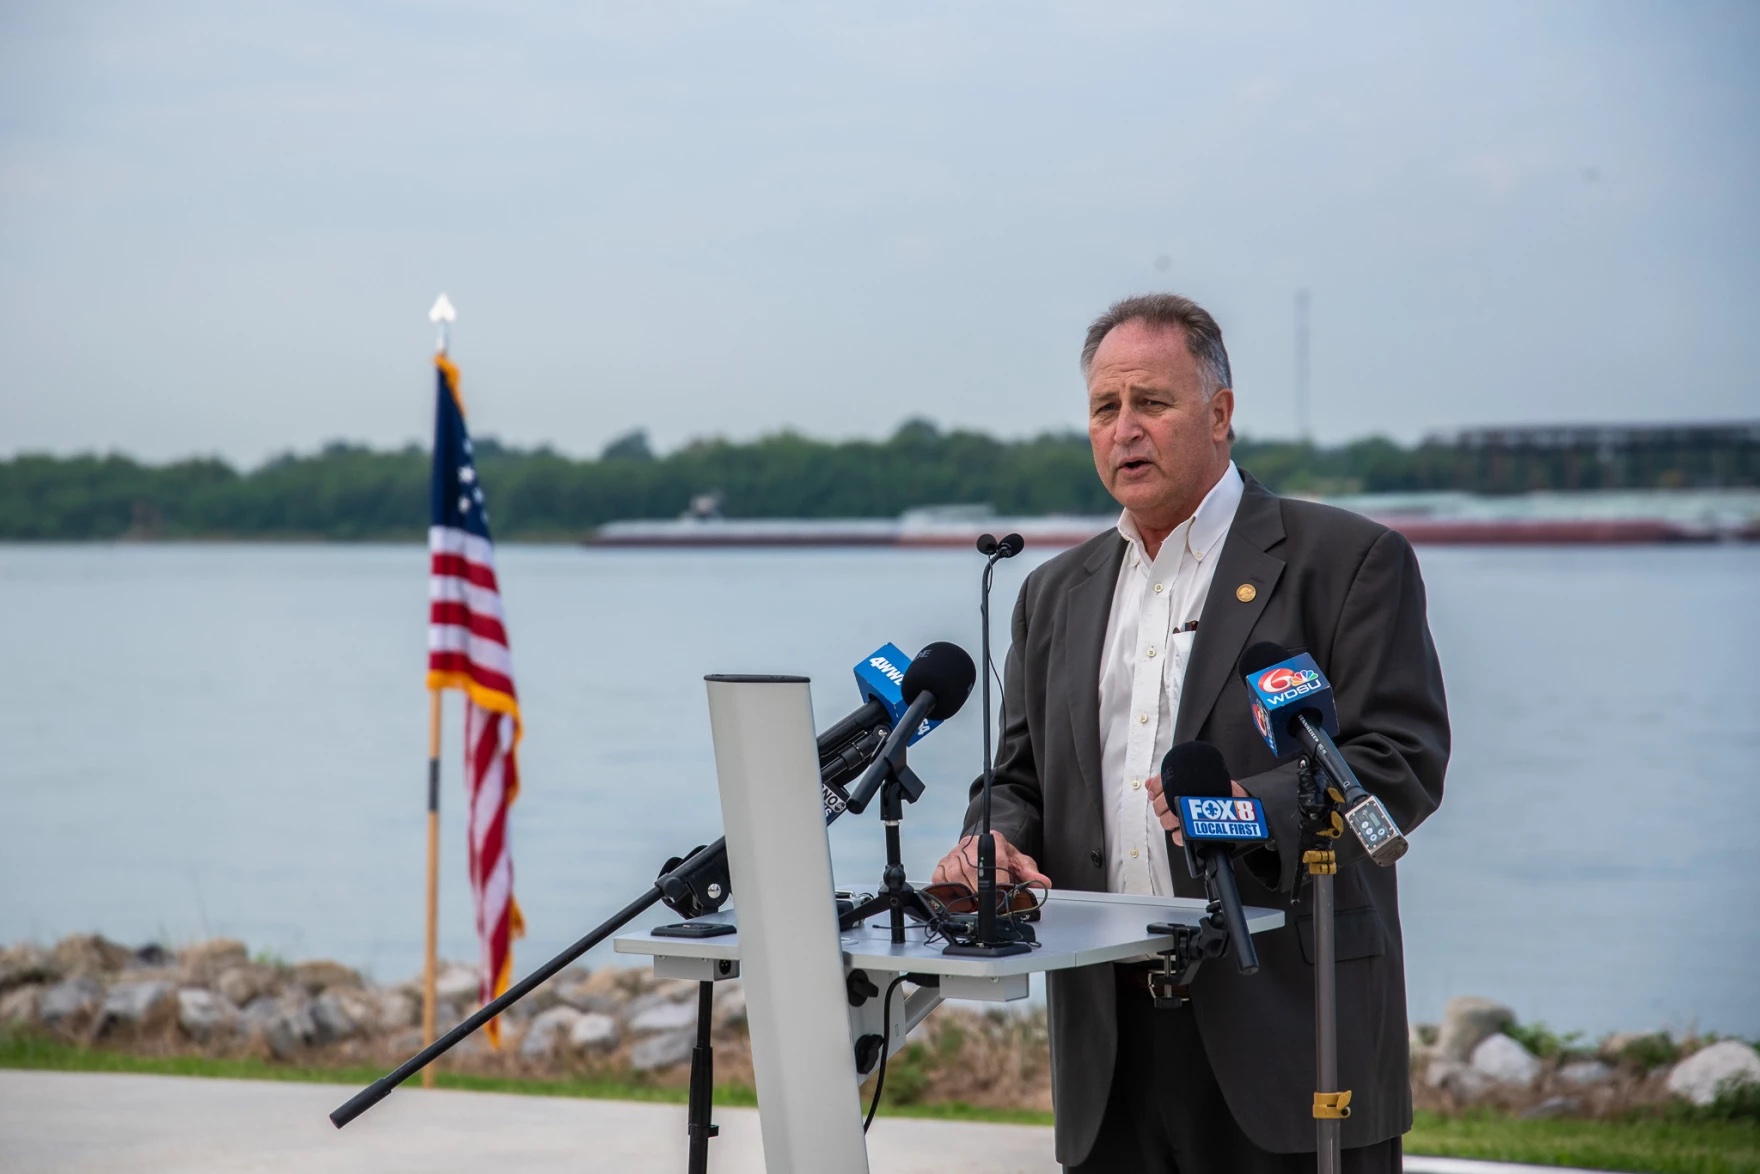 A man in a suit talks at an outdoor press conference. Medium shot